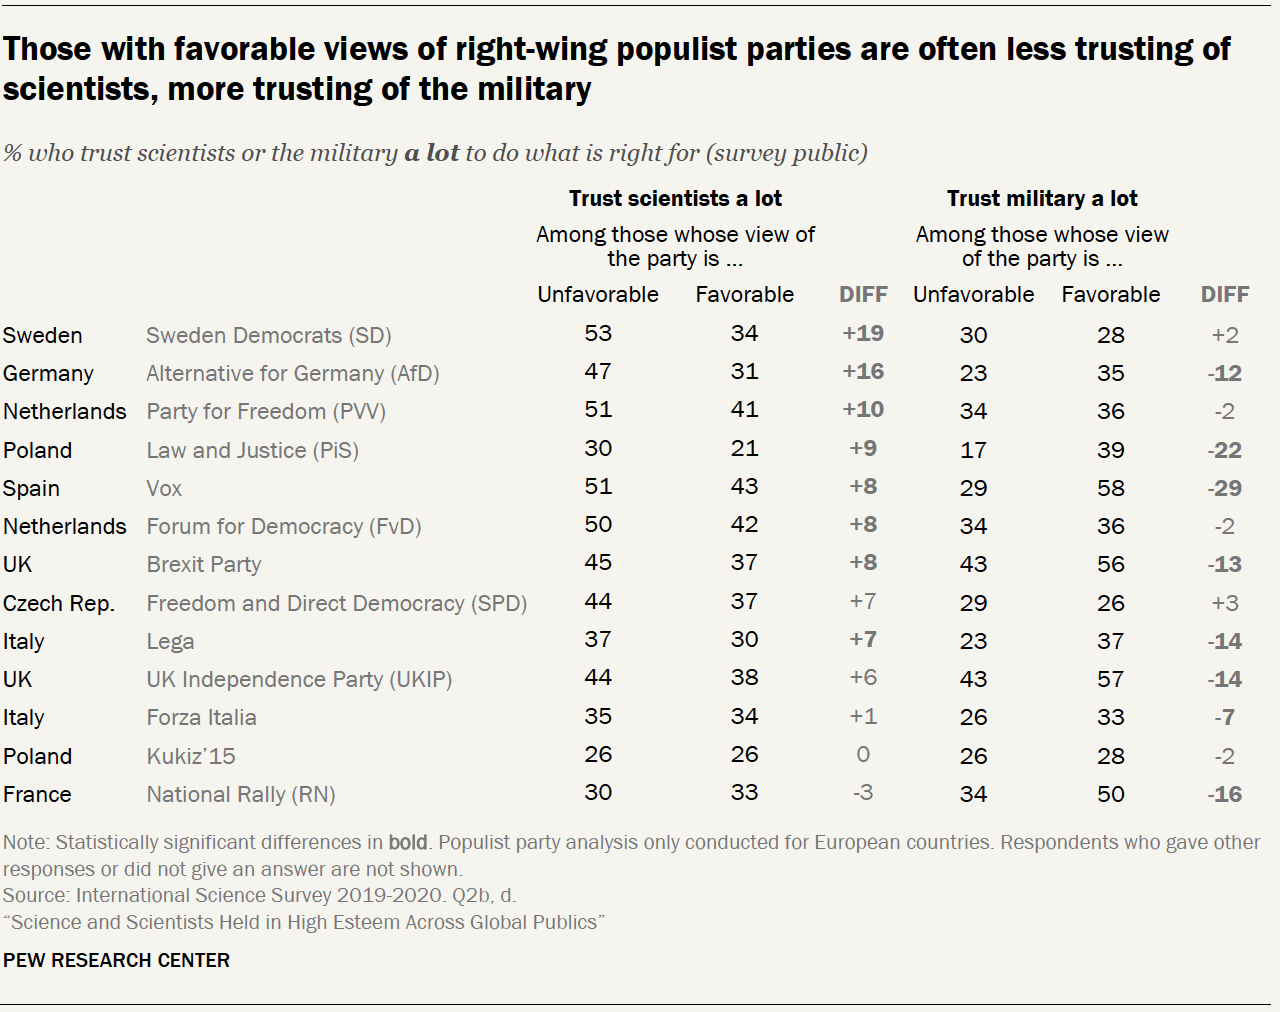 Chart shows those with favorable views of right-wing populist parties are often less trusting of scientists, more trusting of the military